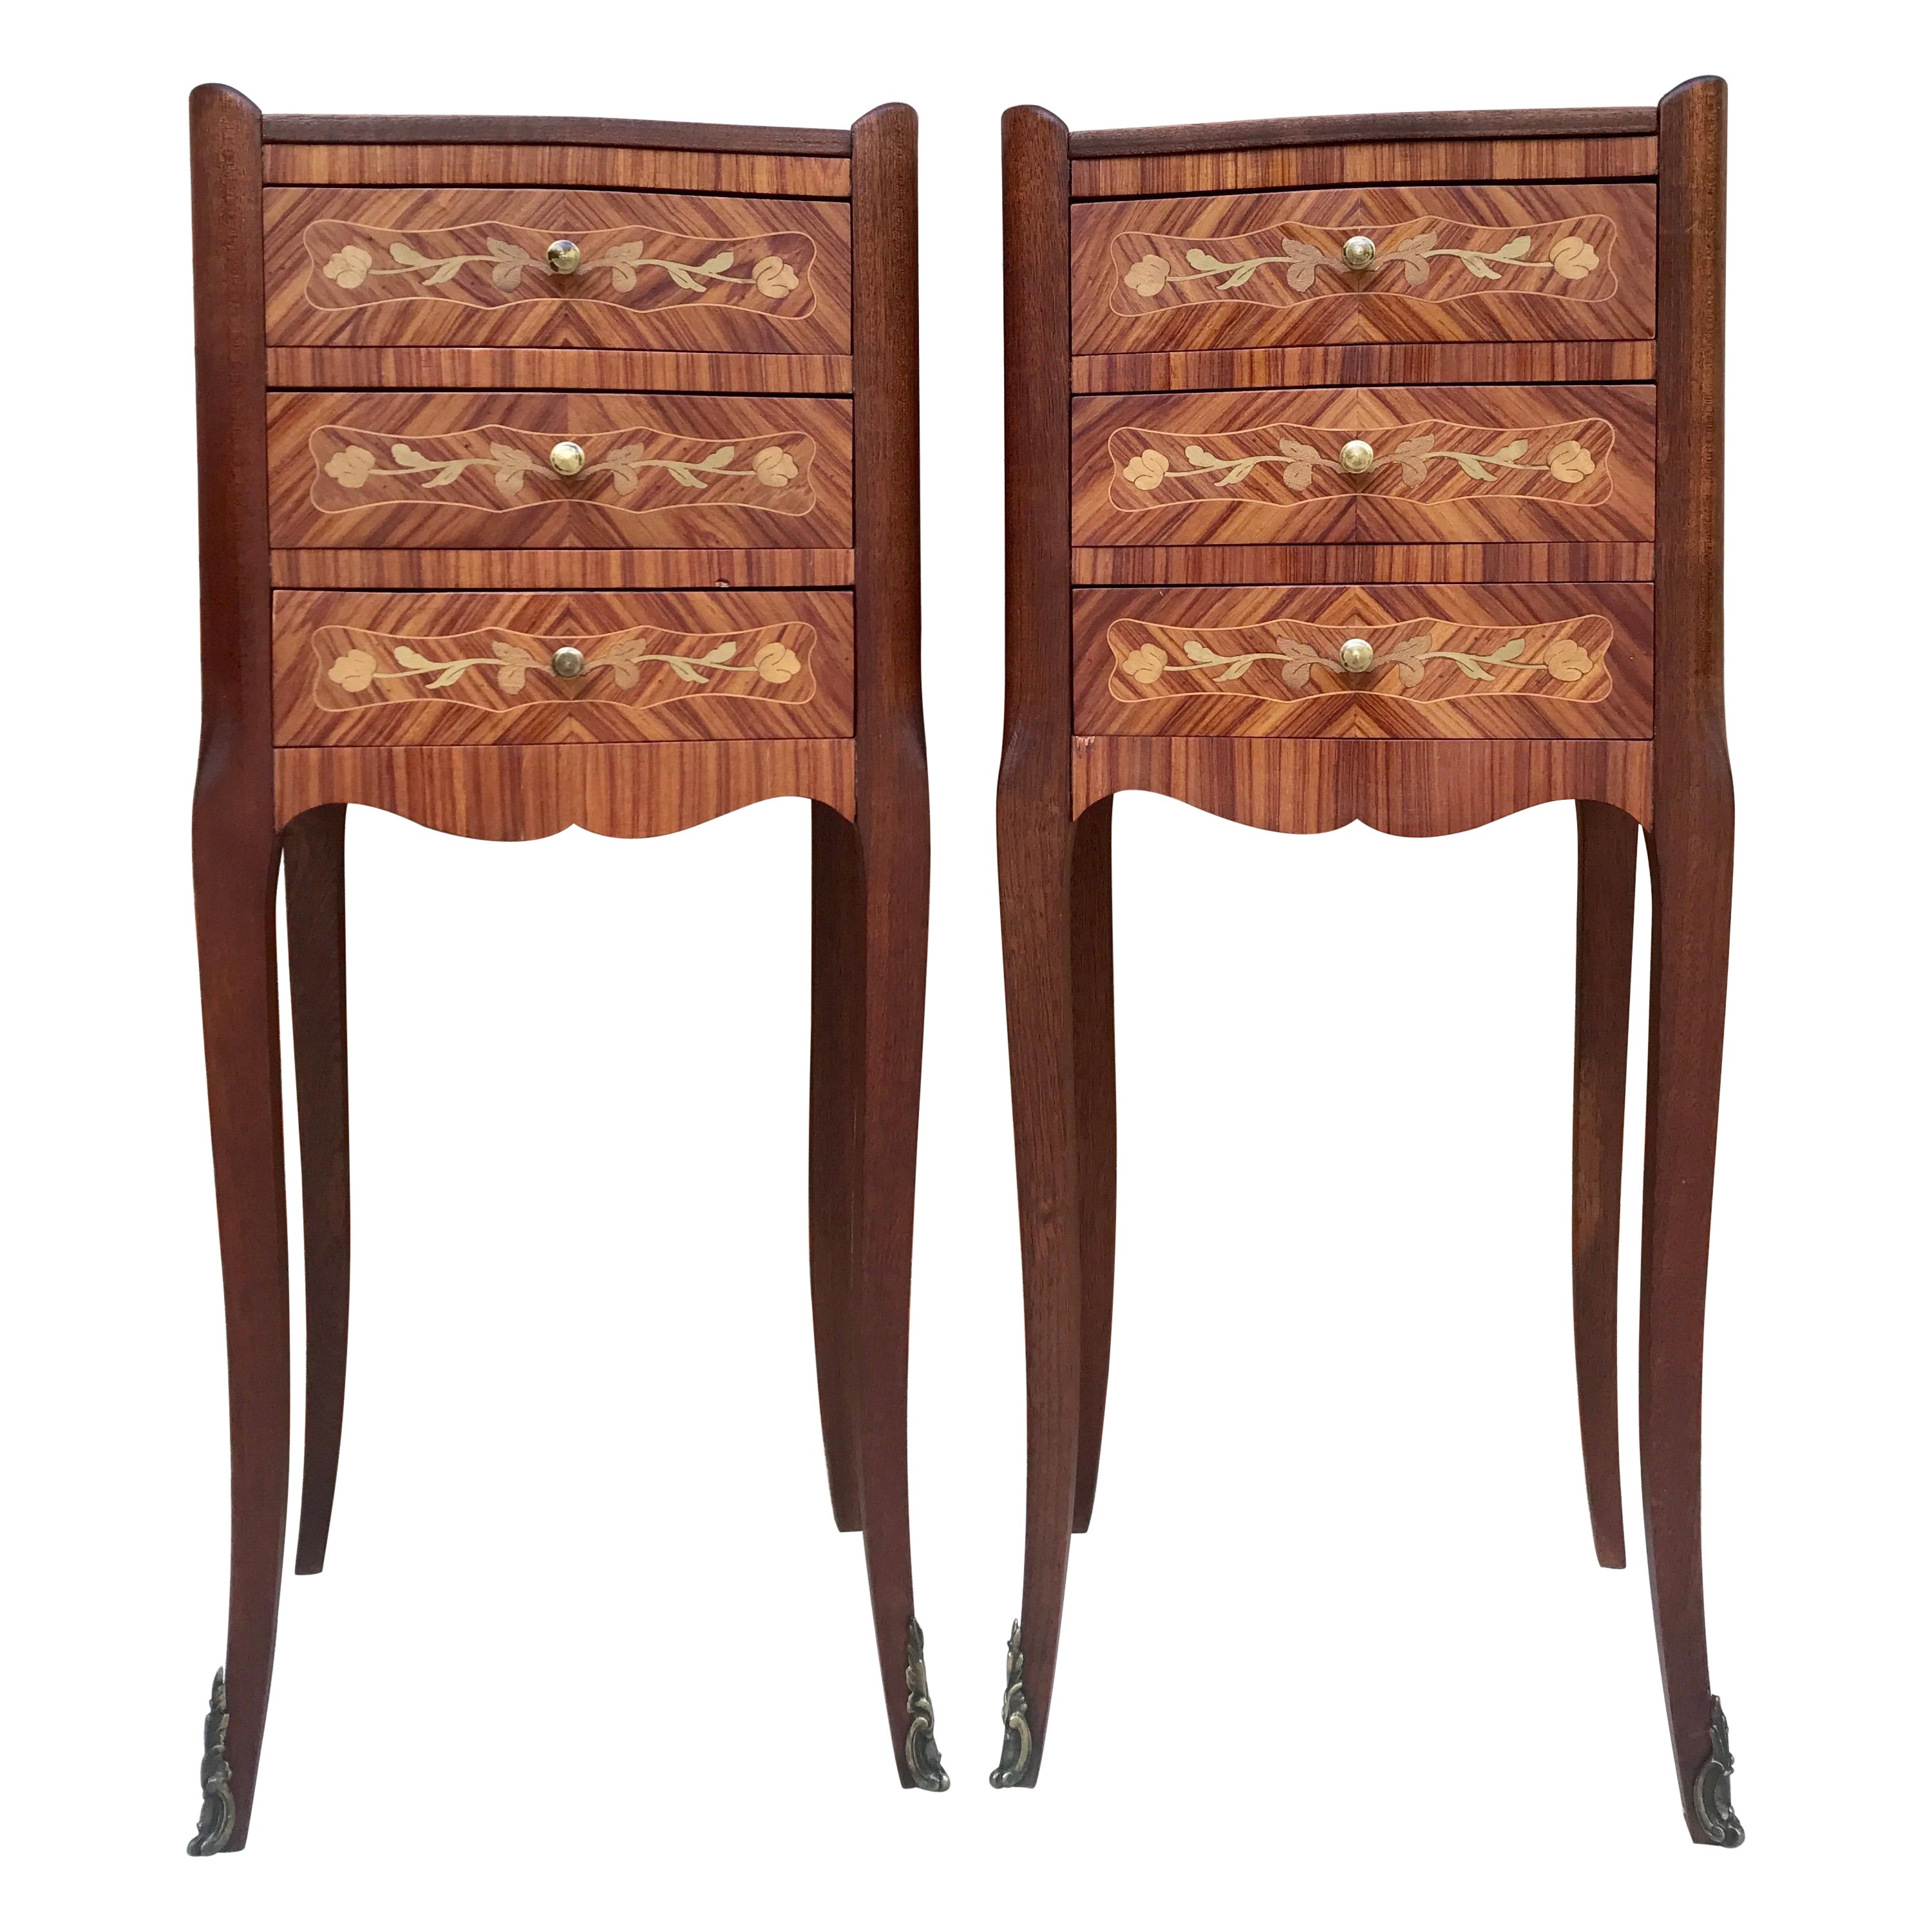 Early 20th Century French Bedside Tables in Marquetry & Bronze with Iron Details For Sale